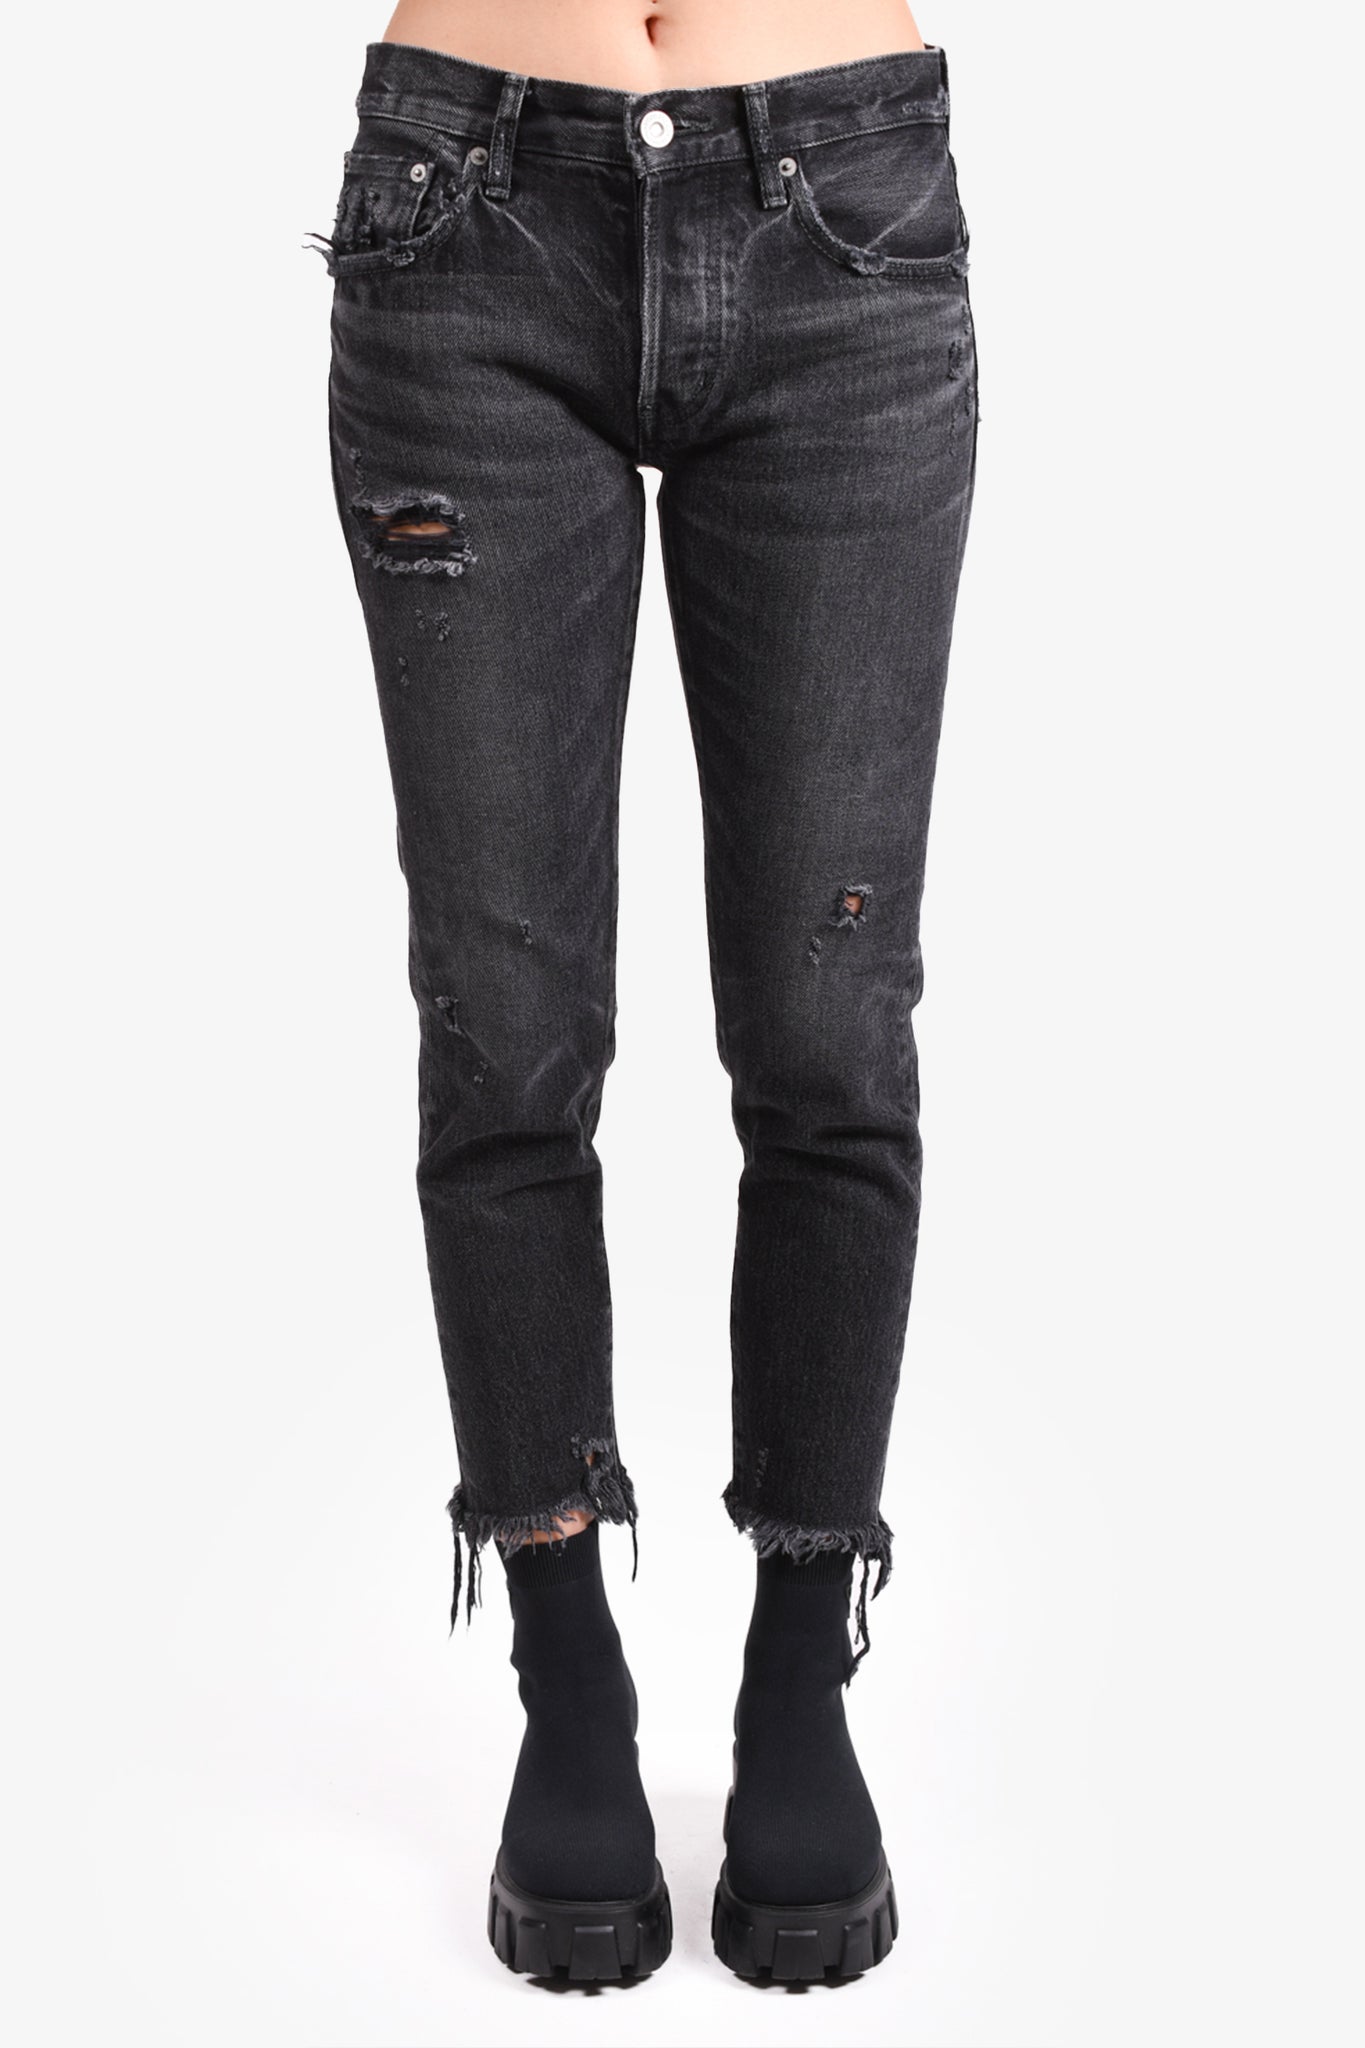 Moussy Washed Black Denim Distressed Jeans Size 26